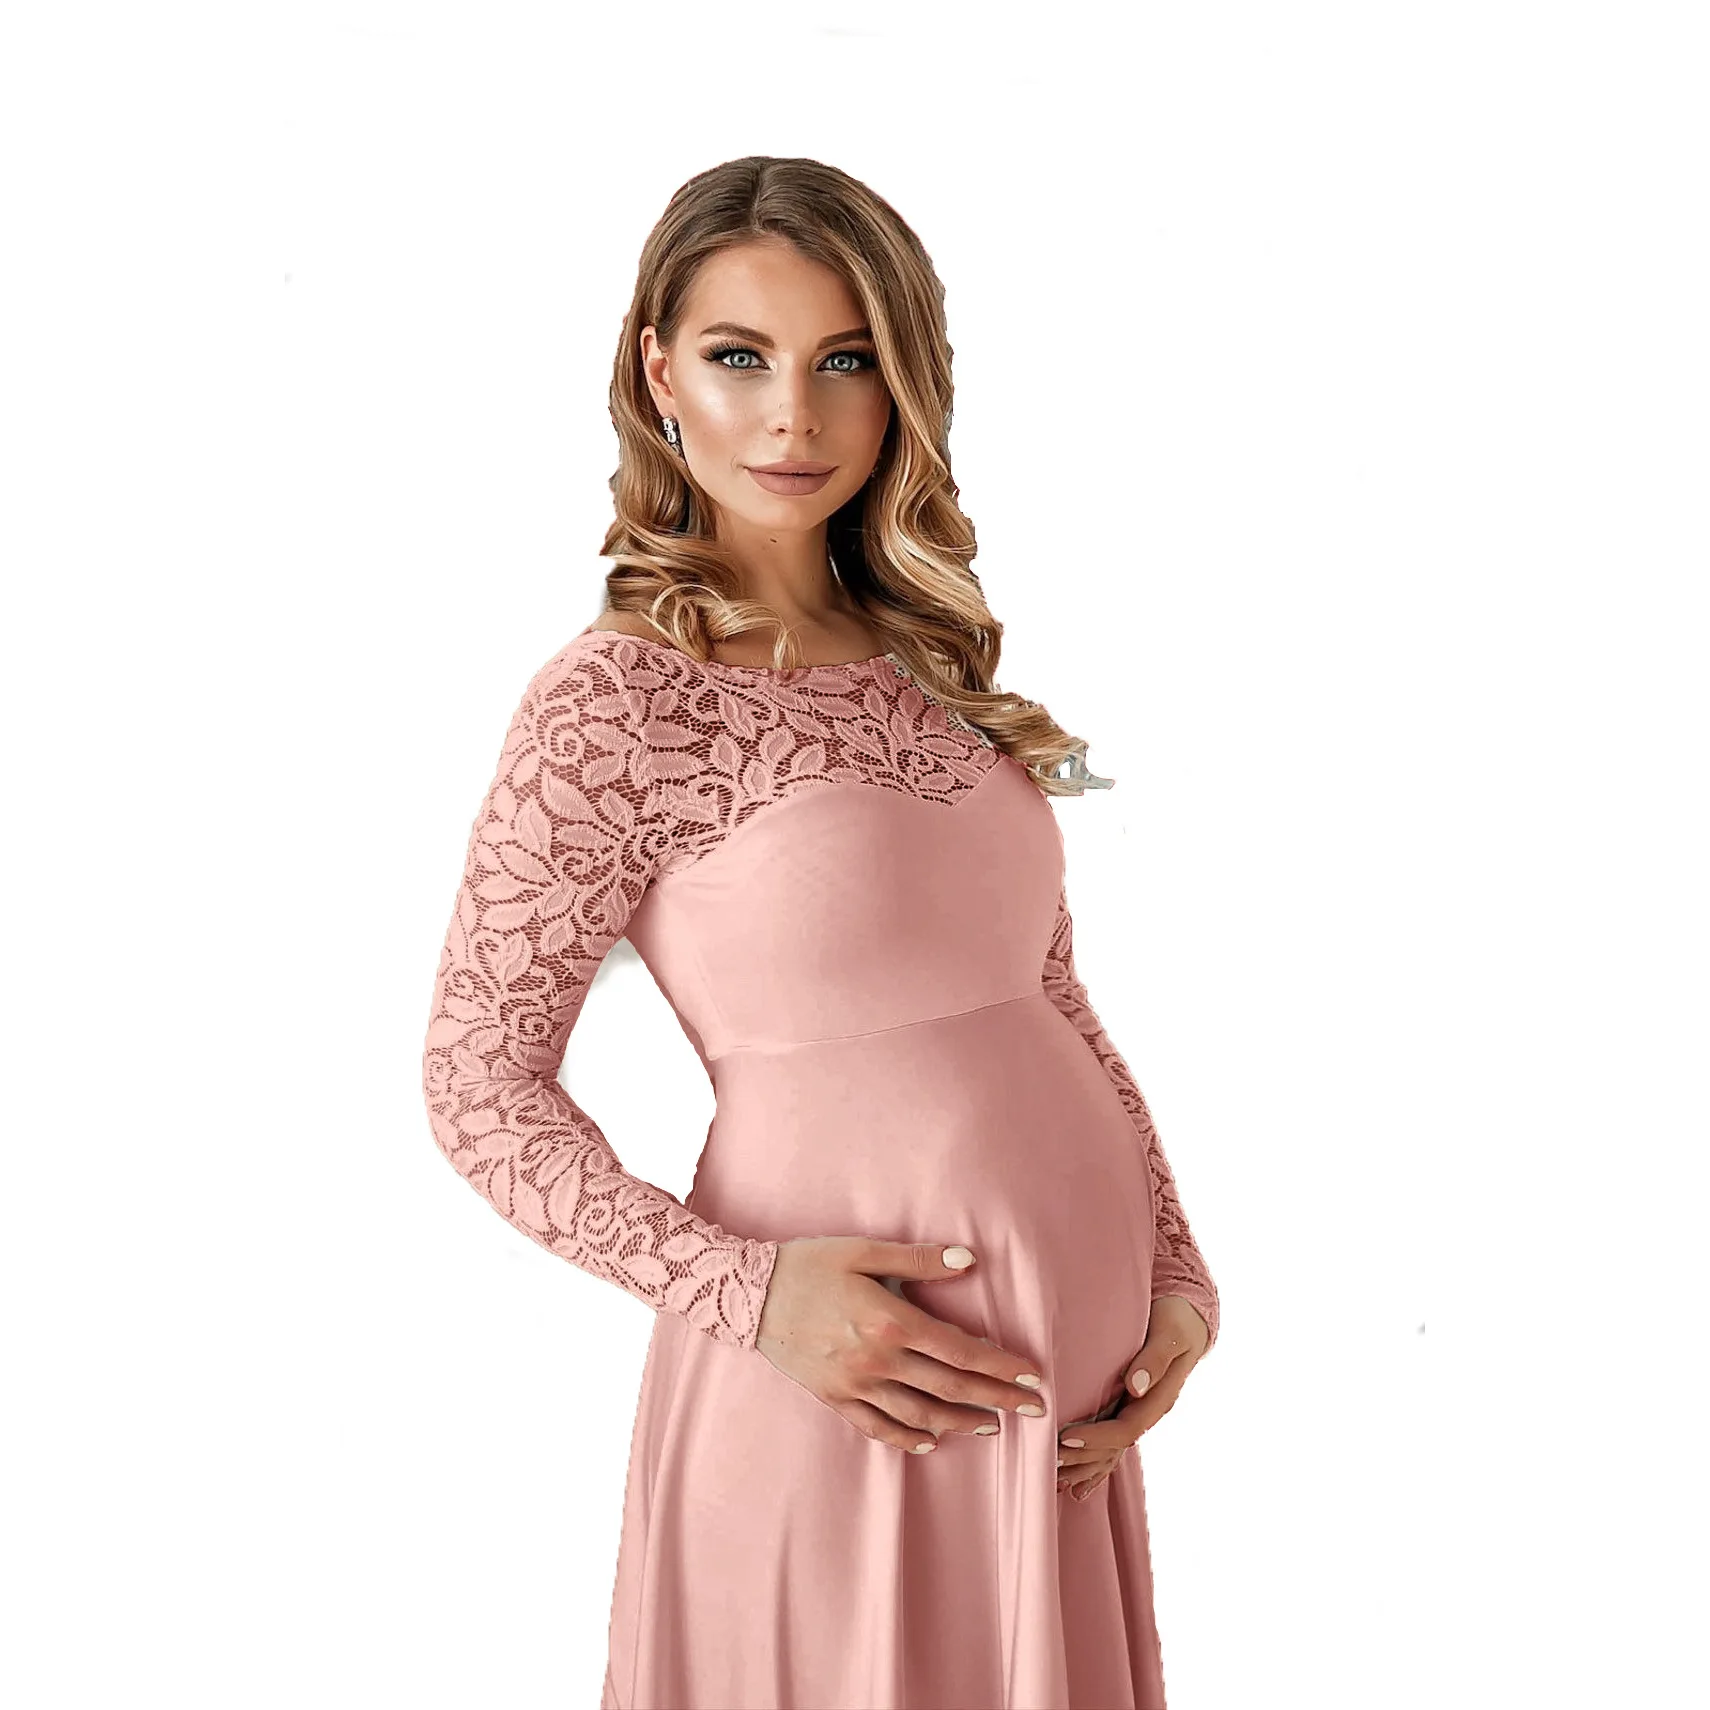 White Chiffon Lace Maternity Dresses for Photo Shoot Long Hollow Out Maternity Photography Props Dresses for Pregnant Women